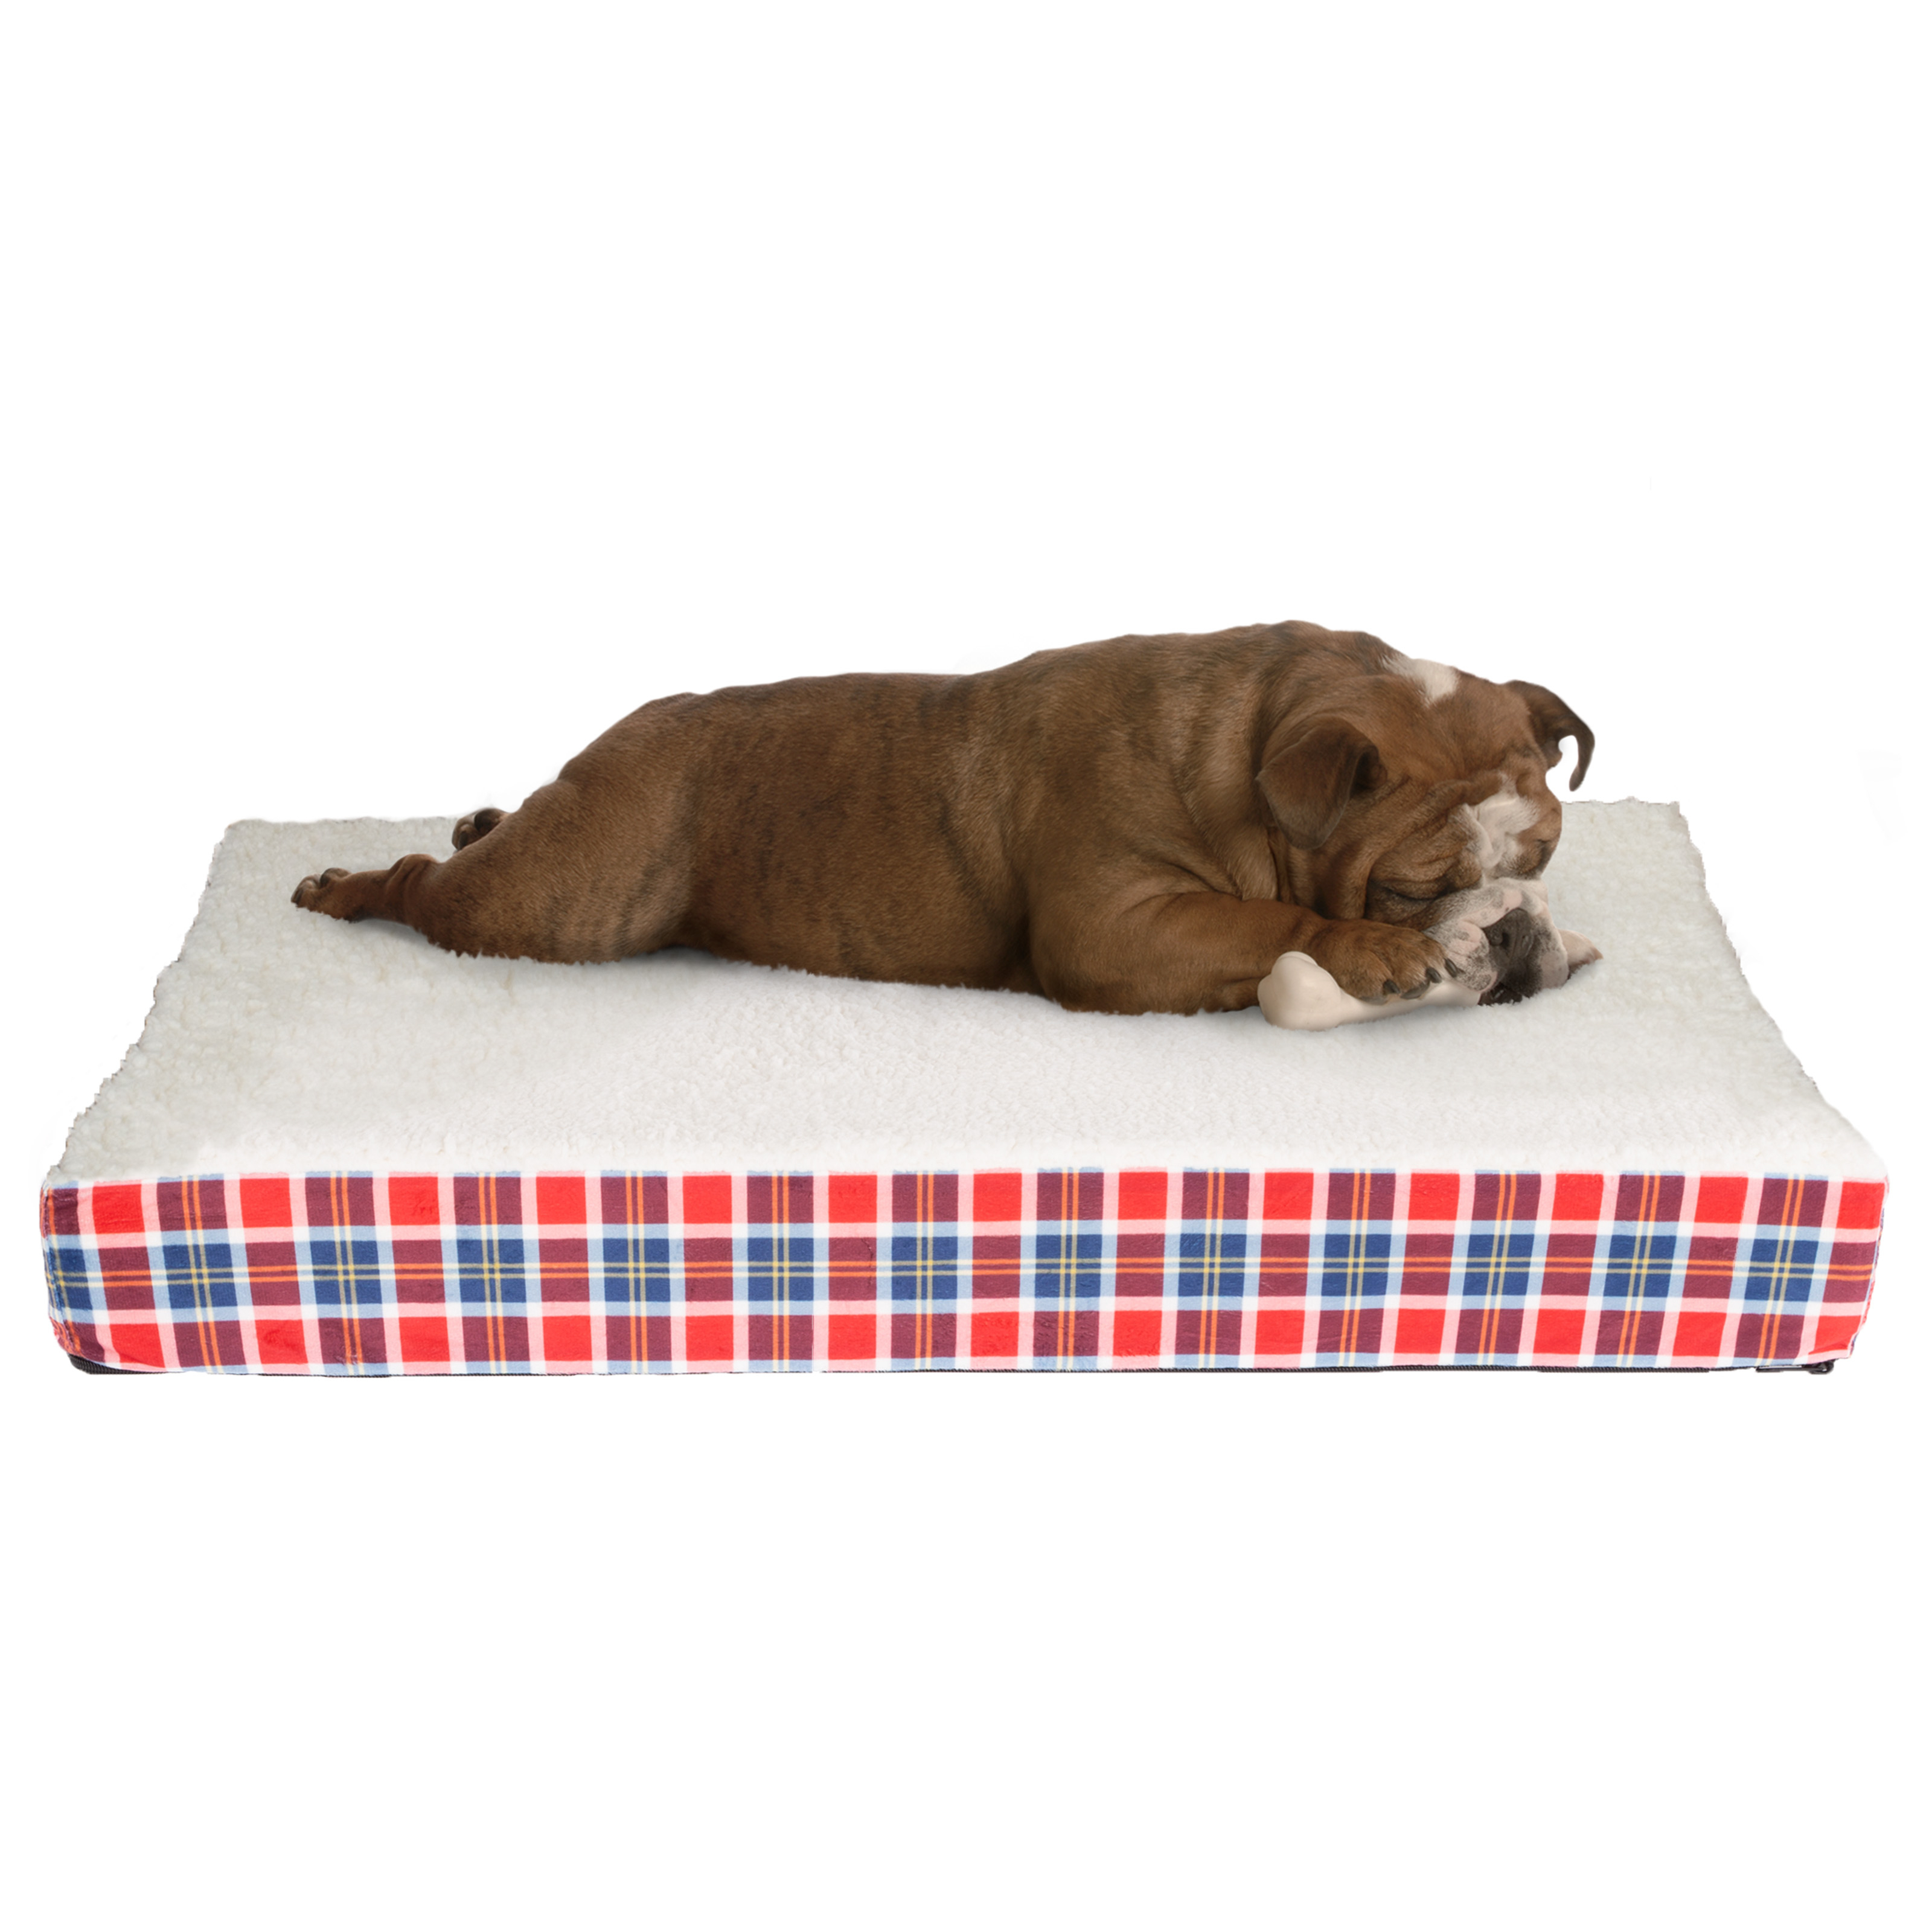 Orthopedic Dog Bed With Memory Foam And Sherpa Top, Removable, Machine Washable Cover, 30.5 X 20.5 X 3.5 Pet Bed By Petmaker (Plaid)